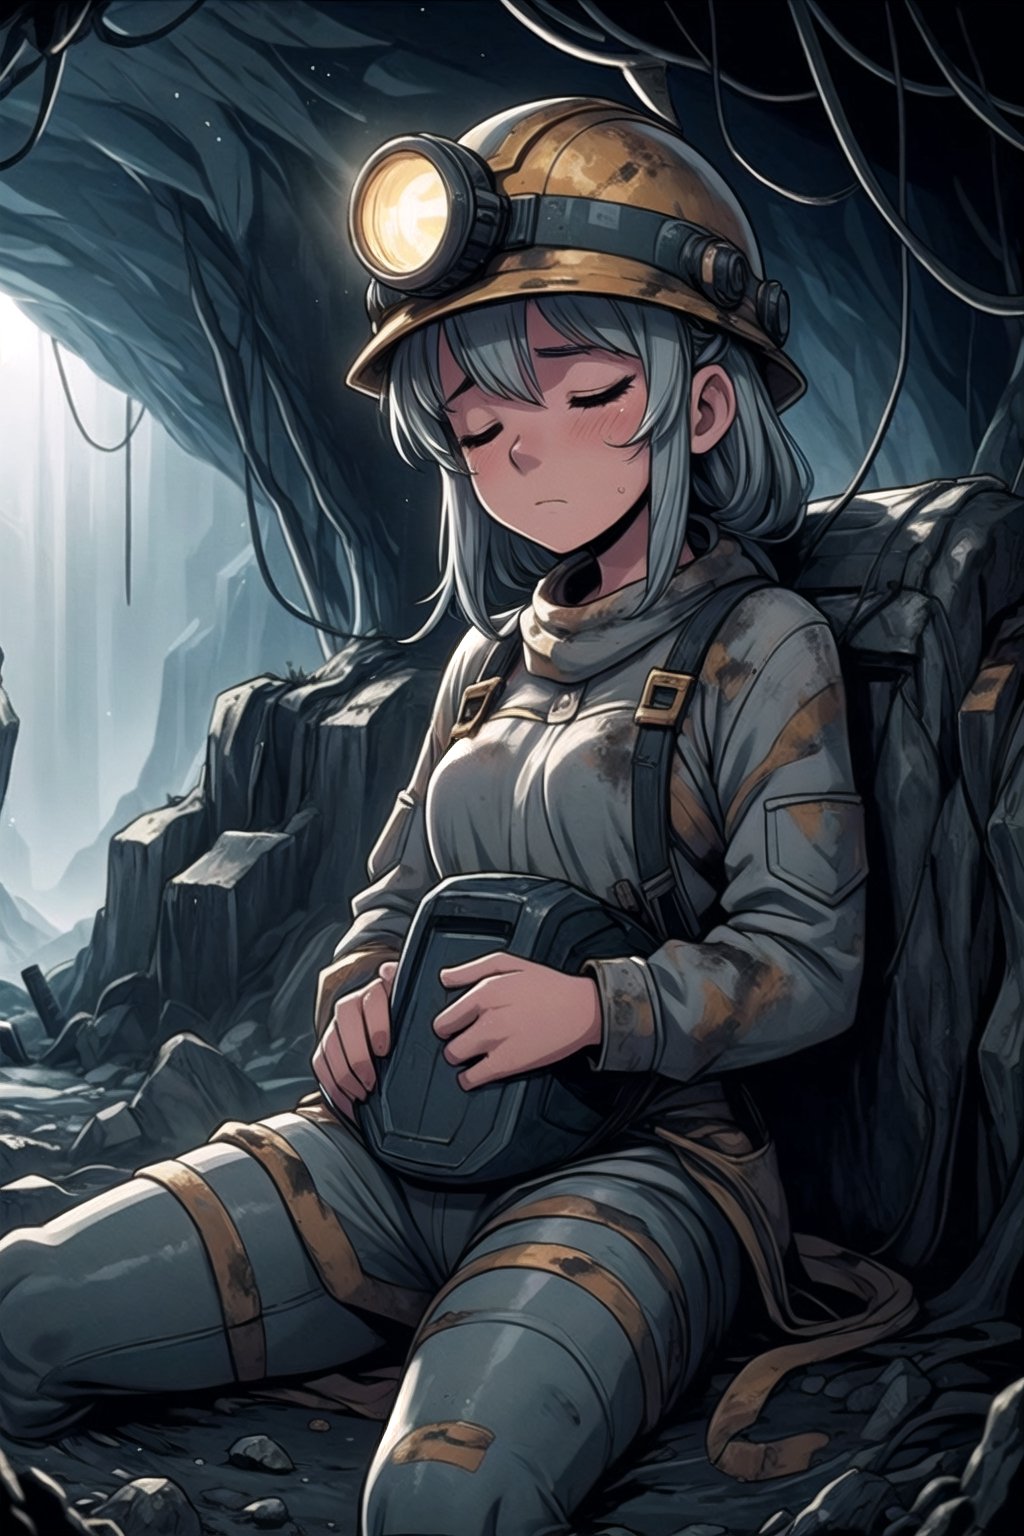 girl, miner, cave, helmet, seated, asleep, dimly lit, mining equipment, rugged terrain, worn-out clothing, exhaustion, peaceful expression, dreamlike atmosphere, solitary, quietude, underground ambiance.,MiNr,